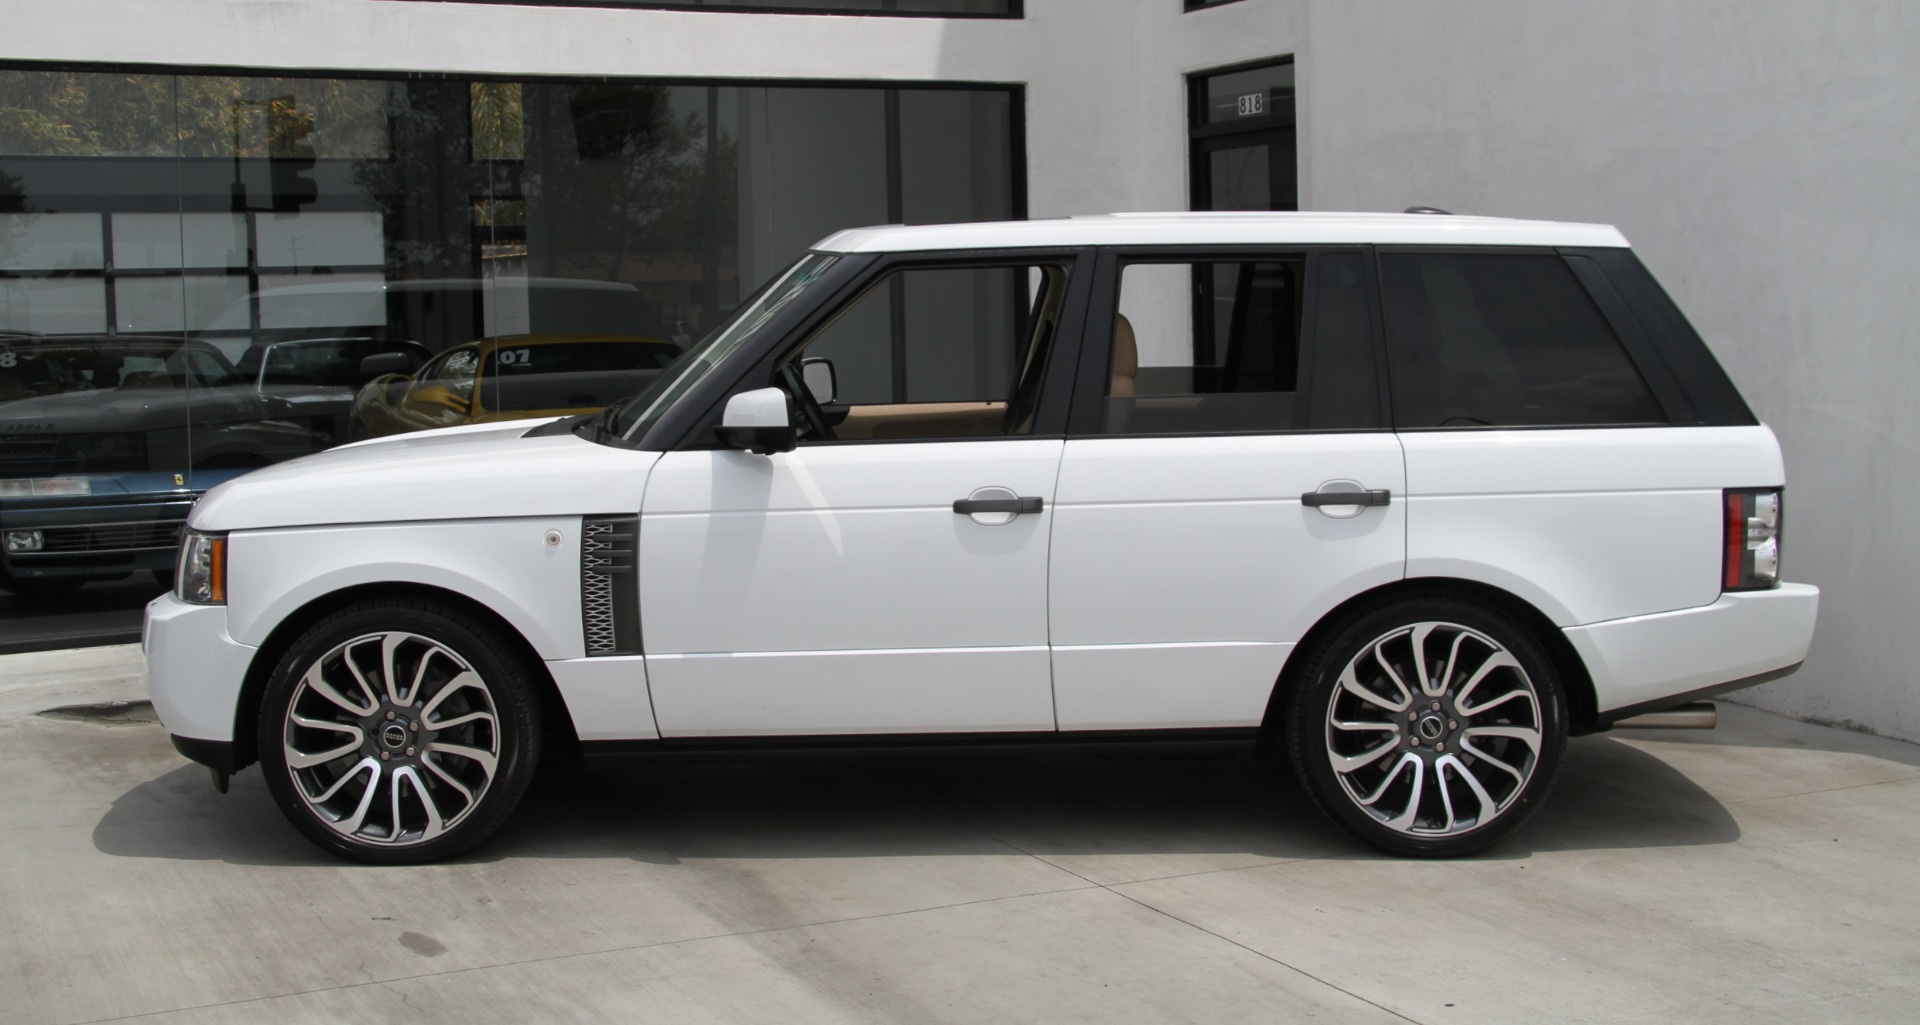 2011 Land Rover Range Rover Supercharged Stock # 6154 for sale near ...